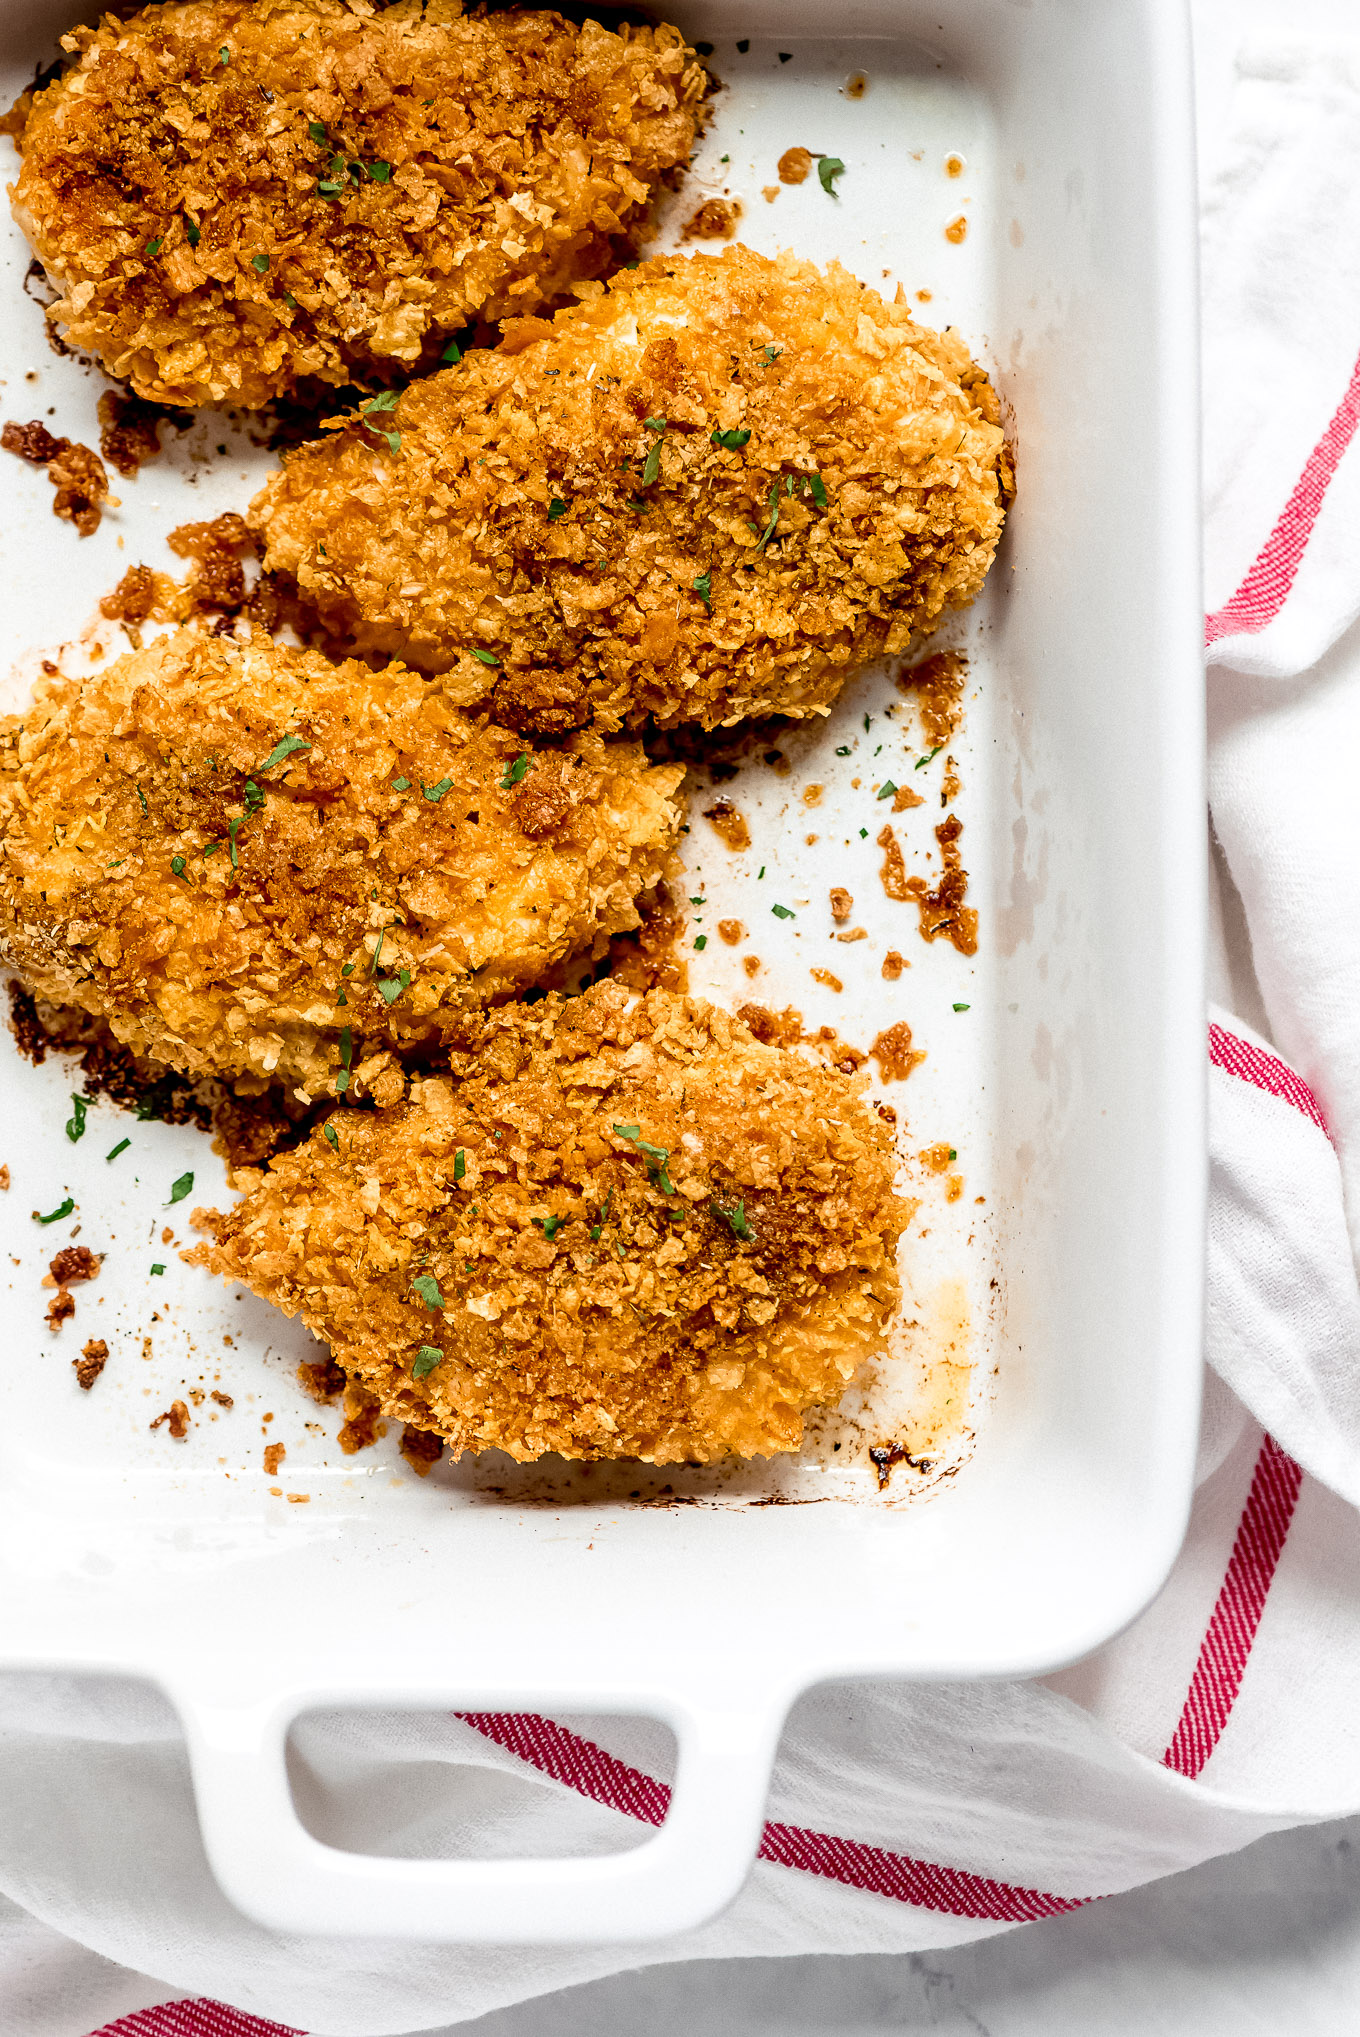 Crispy Baked Chicken with cornflake crispy coating in a white baking dish.